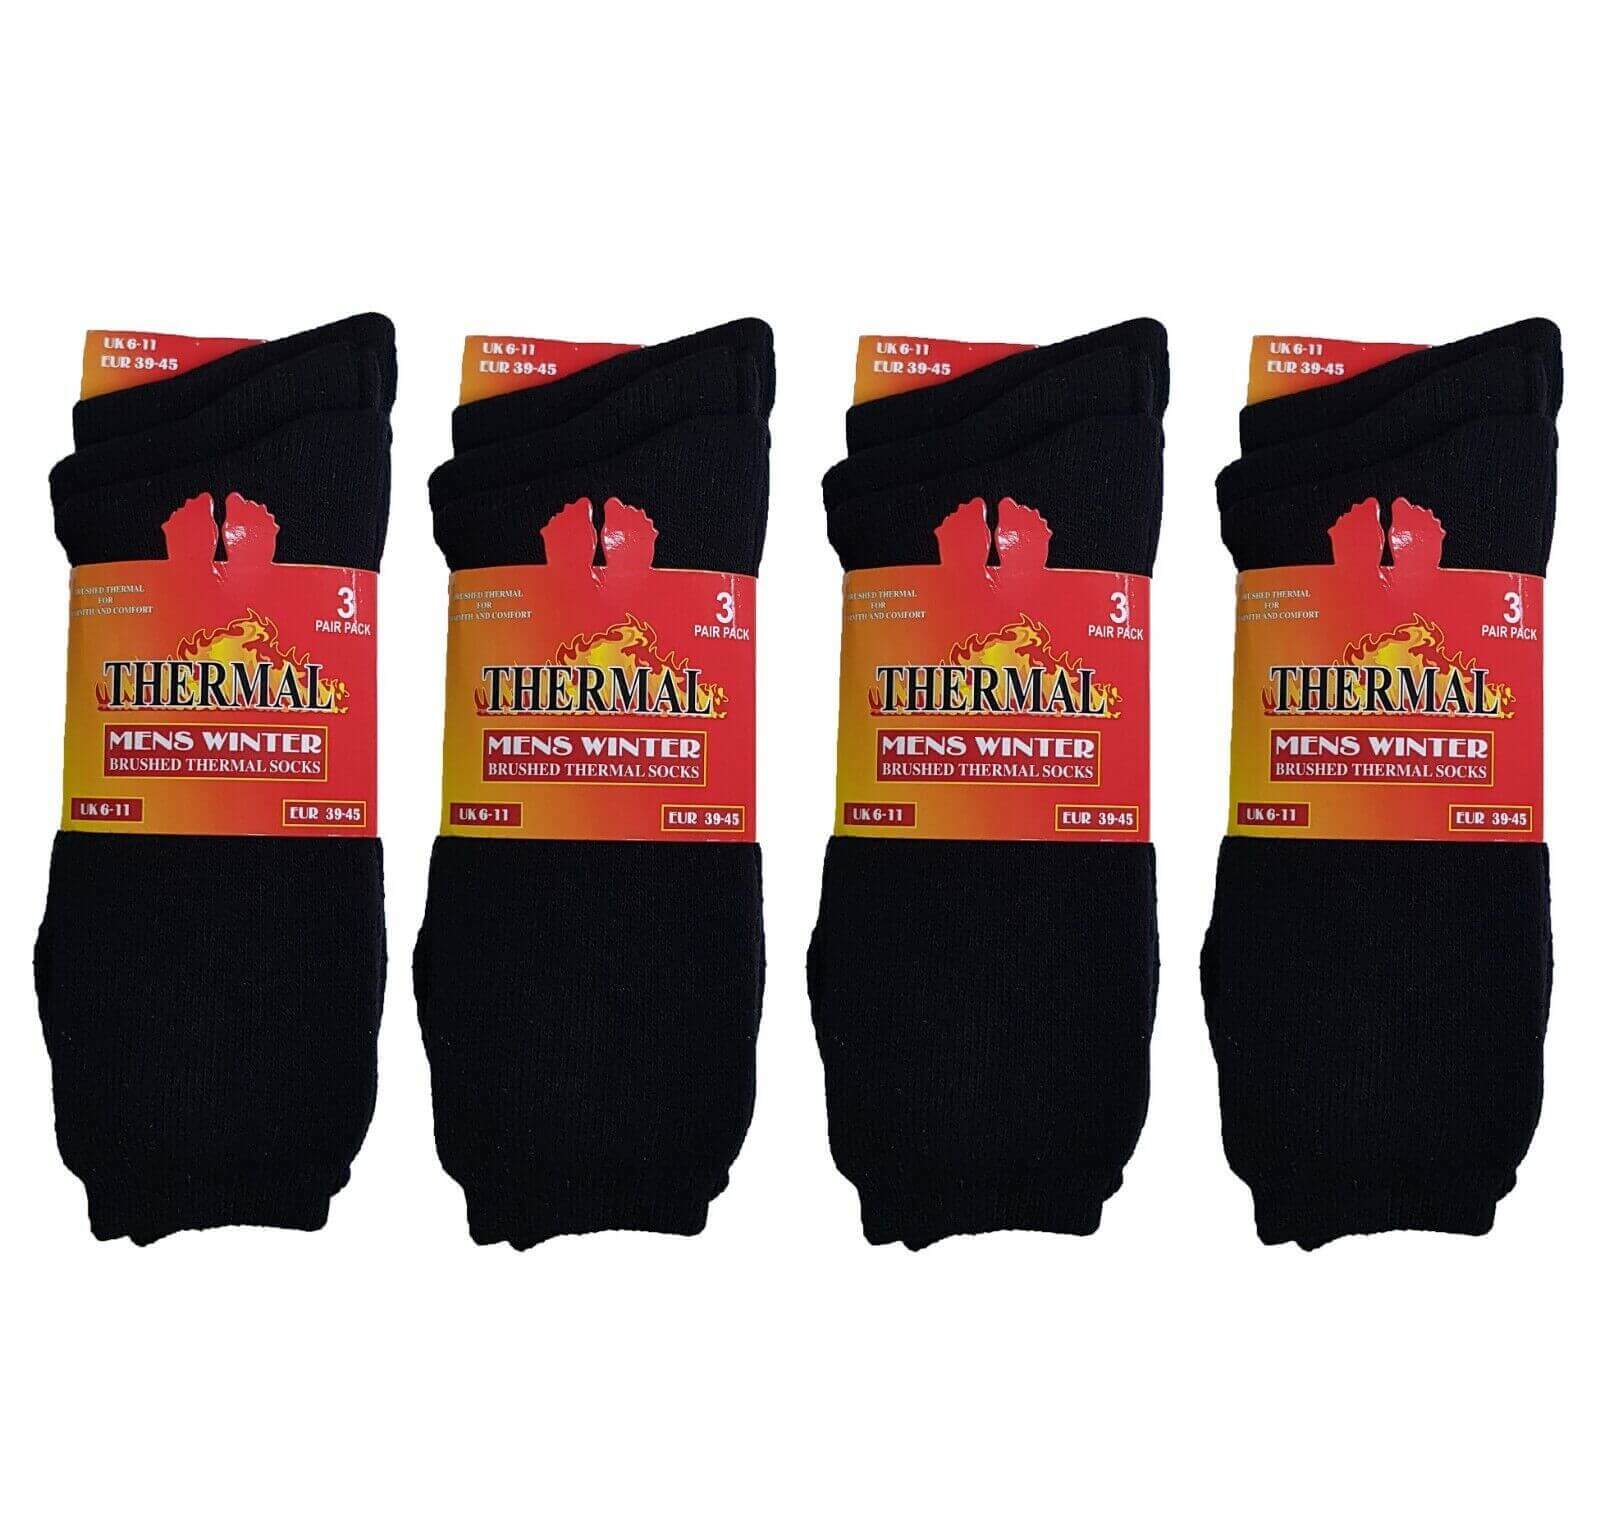 Ultimate 12 Pairs Men's Black Thermal Socks Thick Warm Work Boot Socks. Buy now for £9.00. A Socks by Sock Stack. 6-11, athletics, black, boot, boys, comfortable, cosy, home, mens, outdoor, school, socks, sports, thermal, Ultimate, warm.